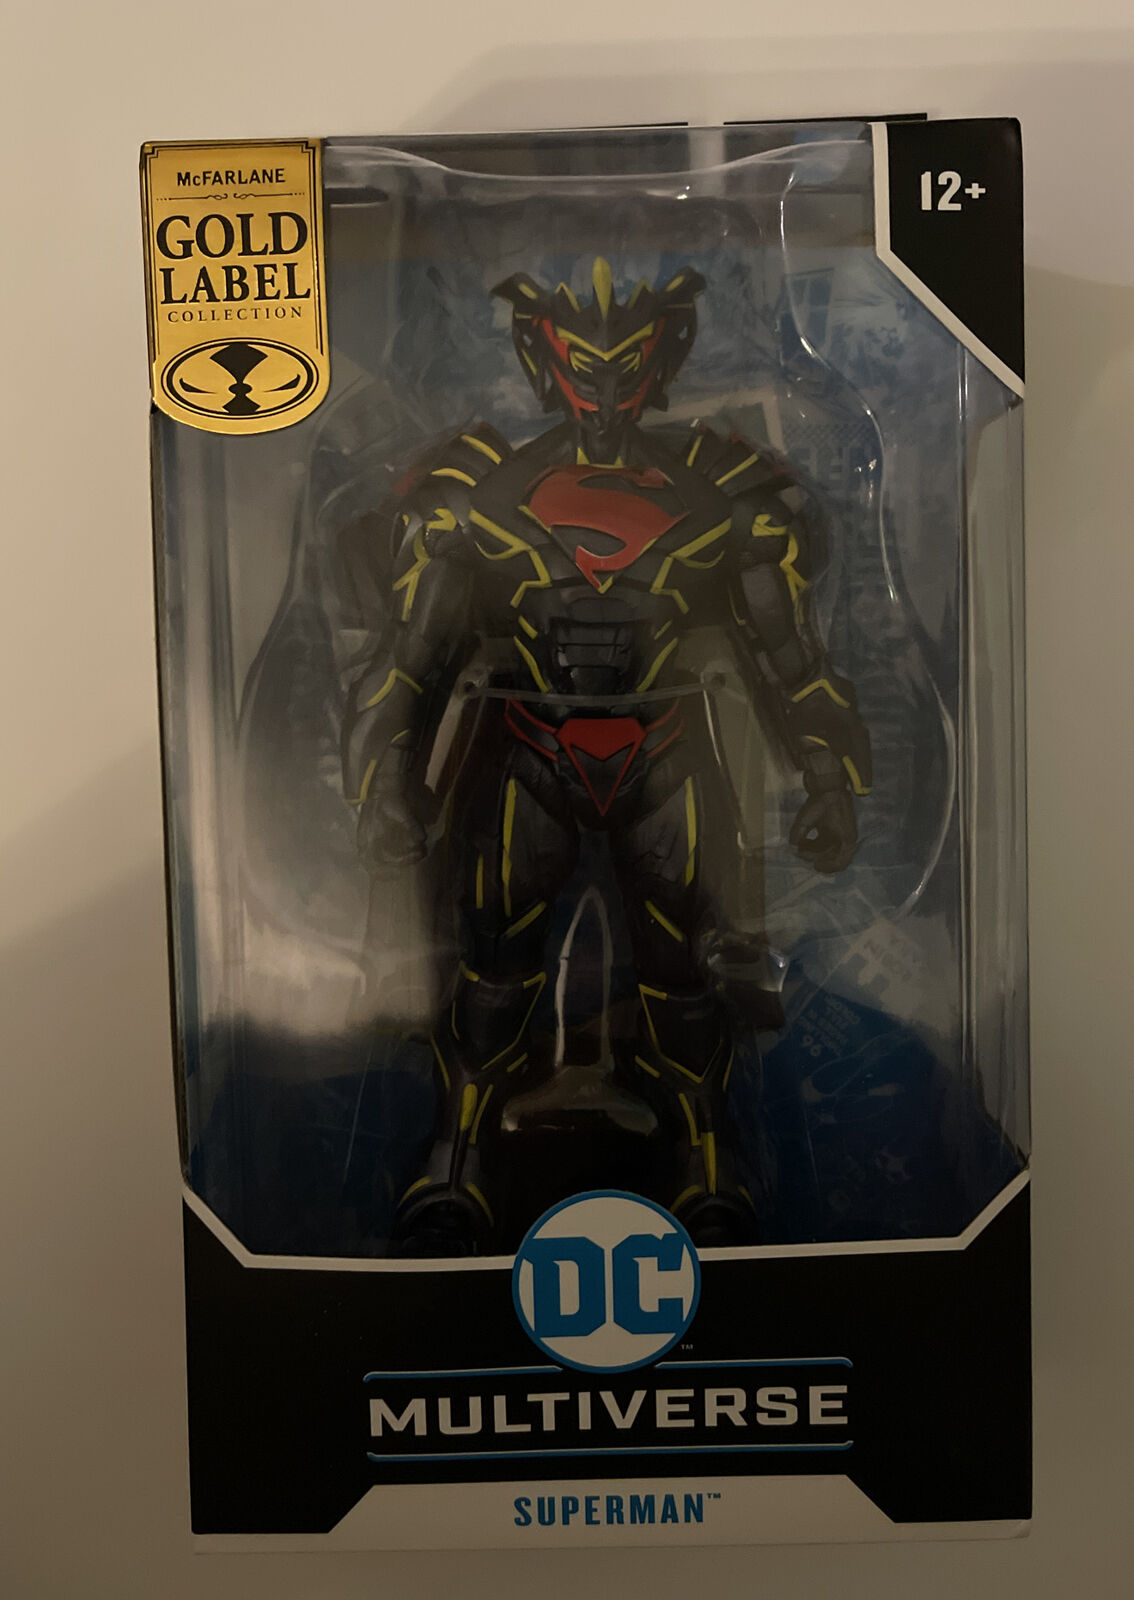 DC Multiverse Superman Energized Unchained Armor McFarlane Gold Label